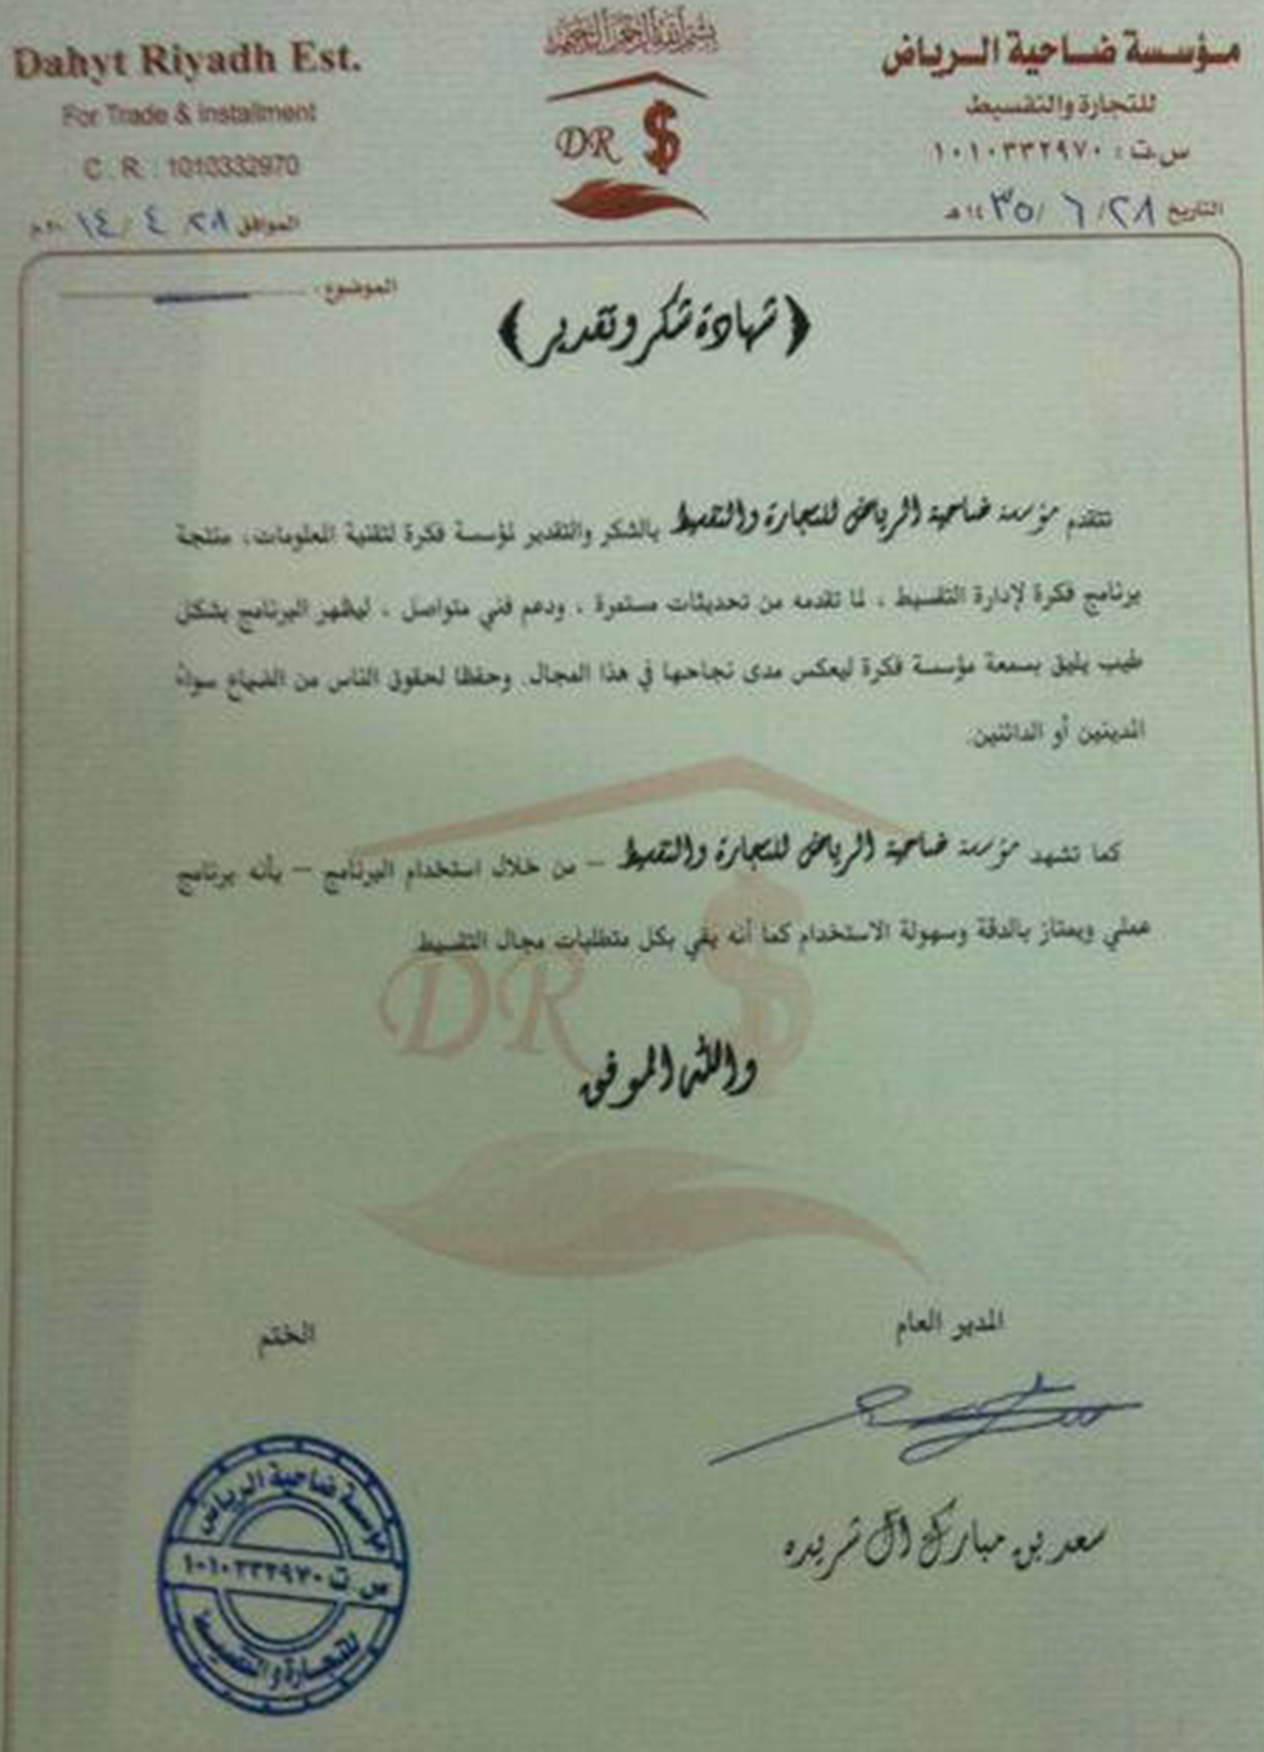 Certificate of thanks to the institution of credibility of the deal for installment